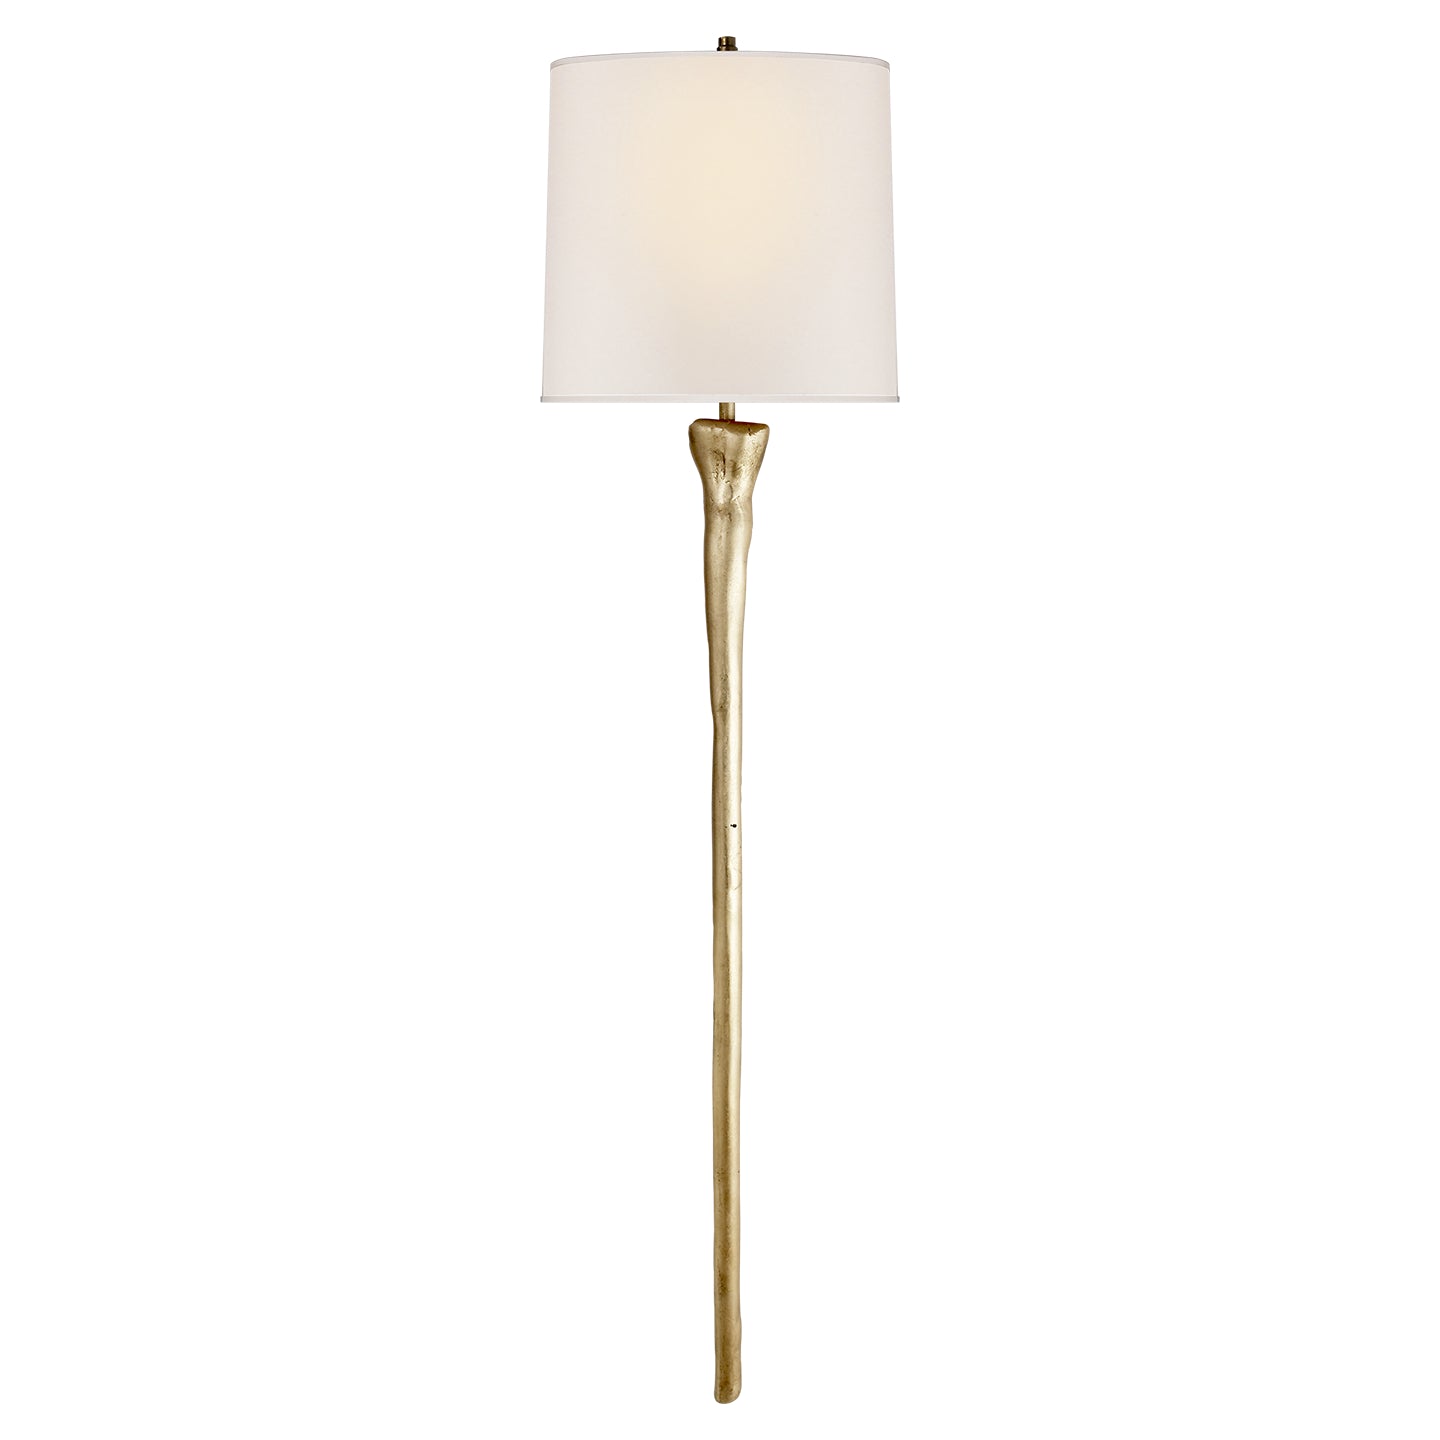 Load image into Gallery viewer, Visual Comfort Signature - TOB 2753G-NP - Two Light Wall Sconce - Sierra - Gild
